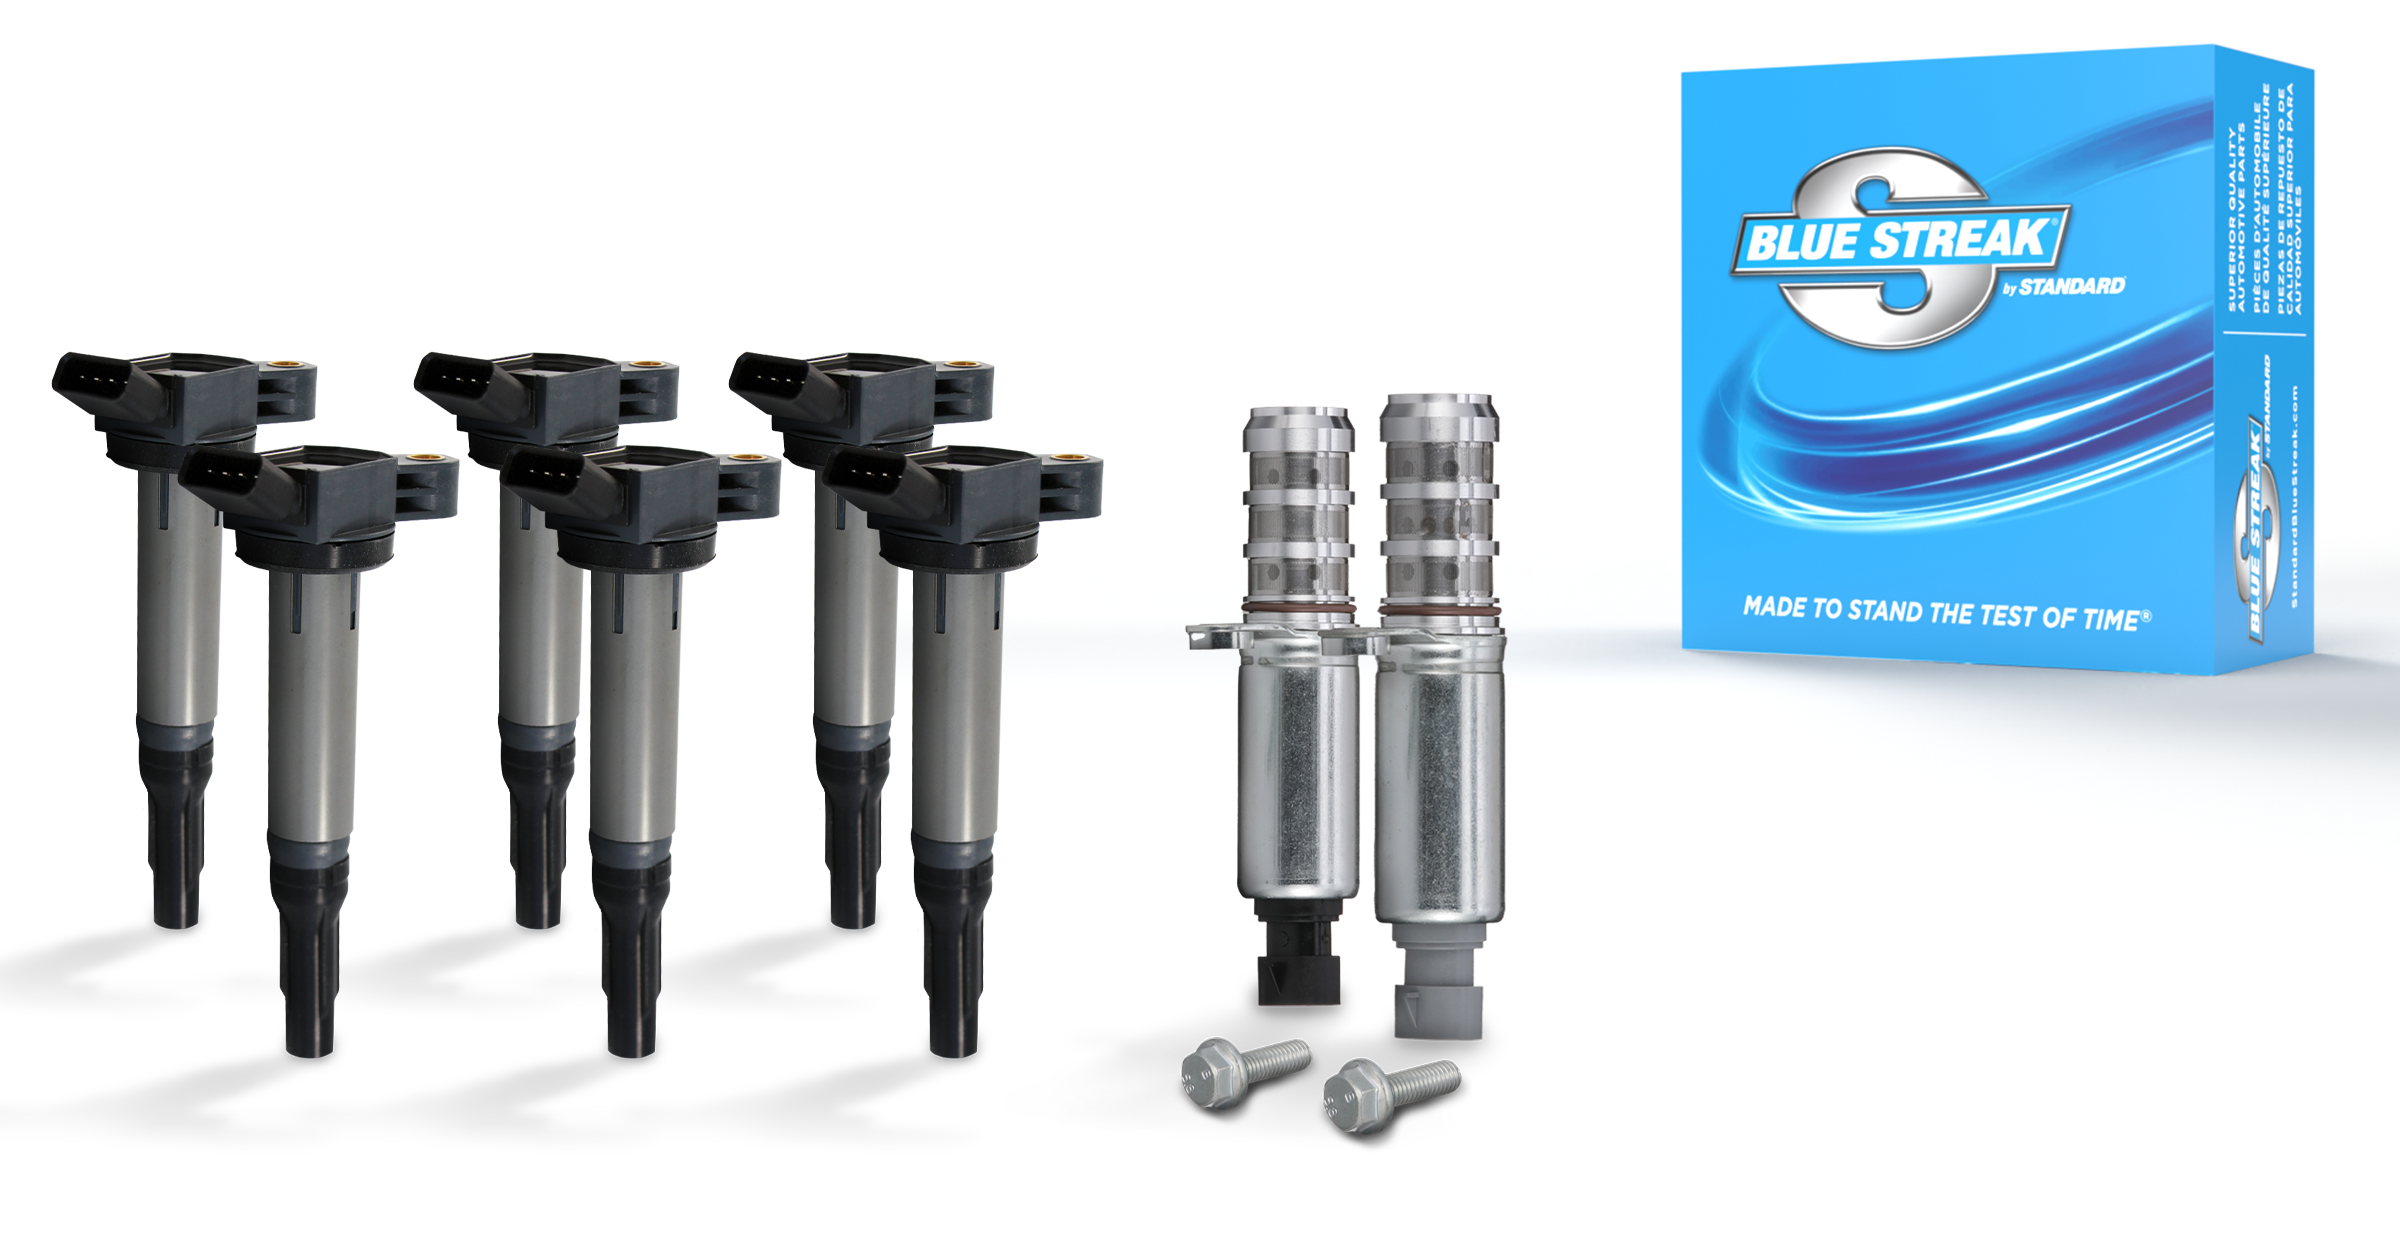 SMP Introduces New Blue Streak Products